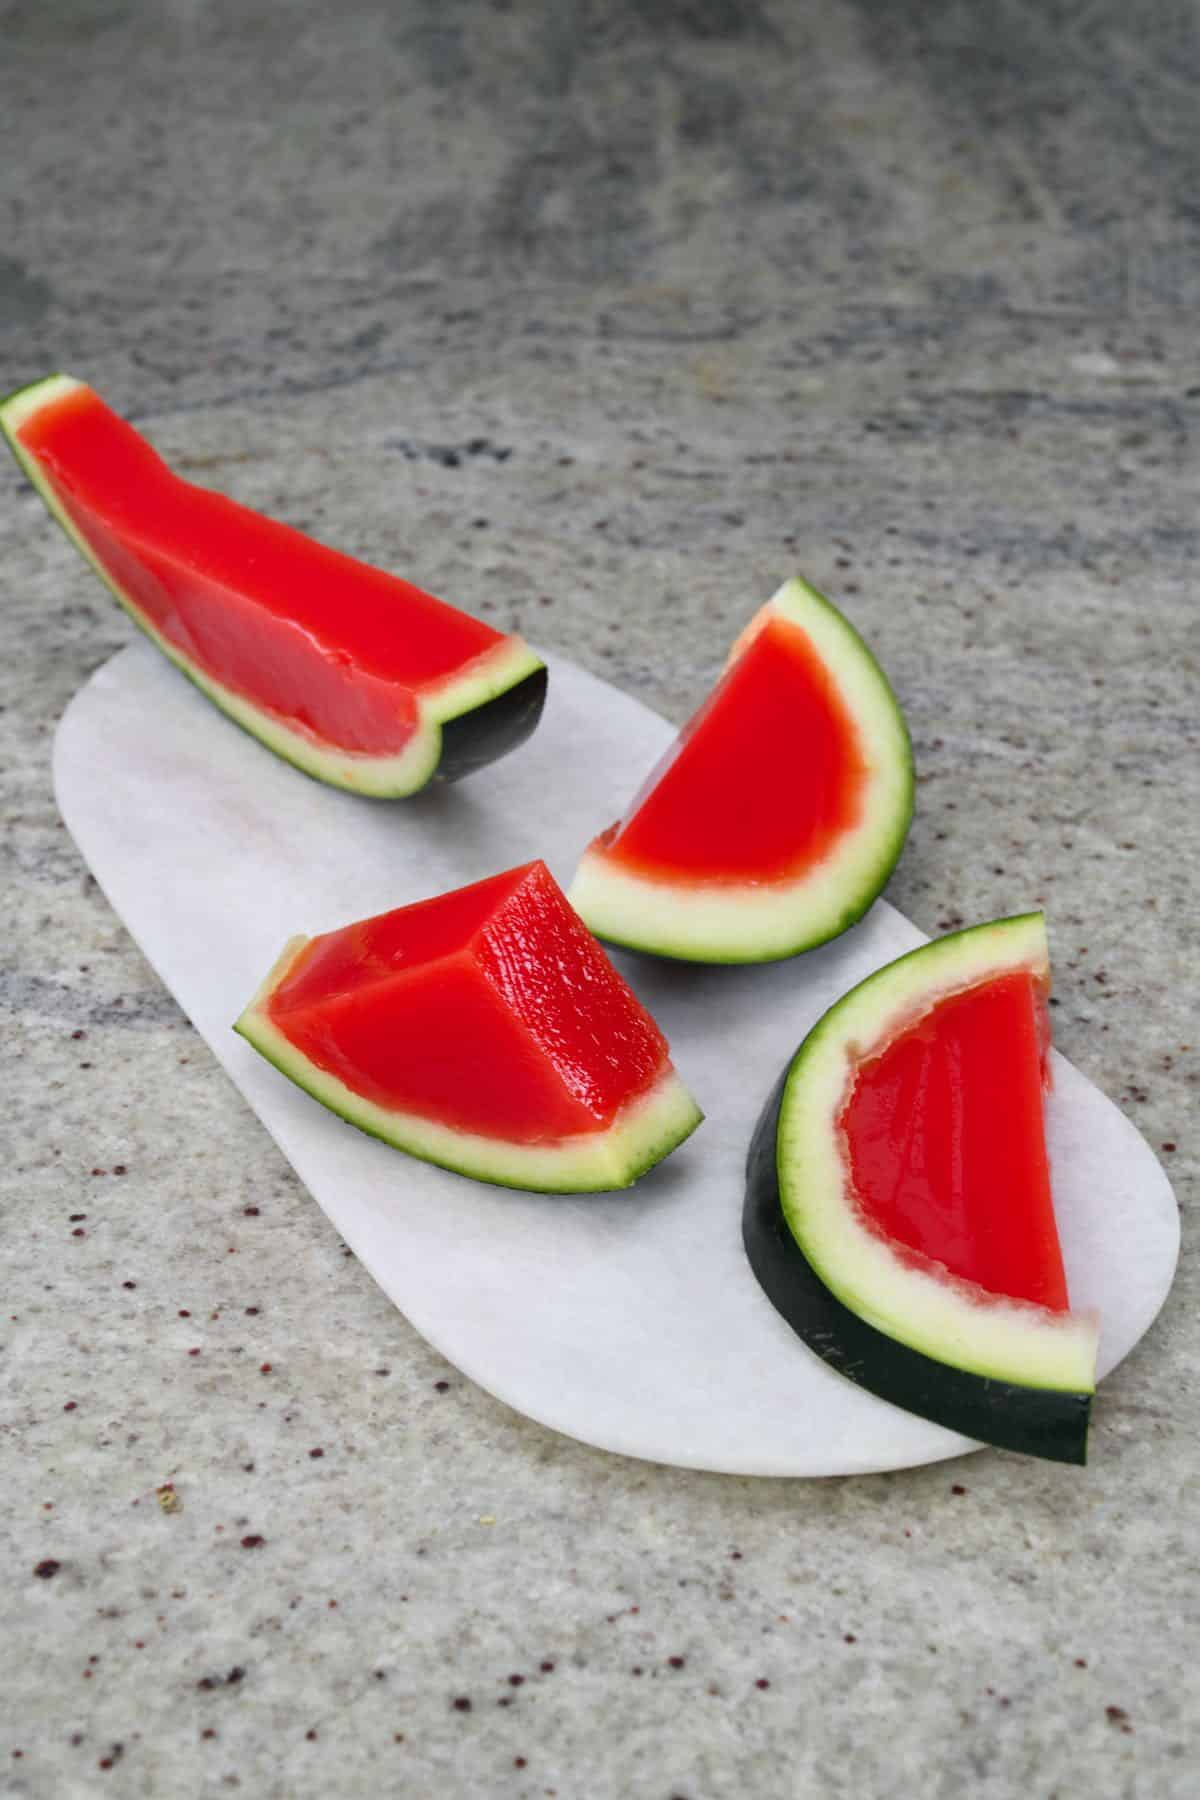 Watermelon jelly cut into slices